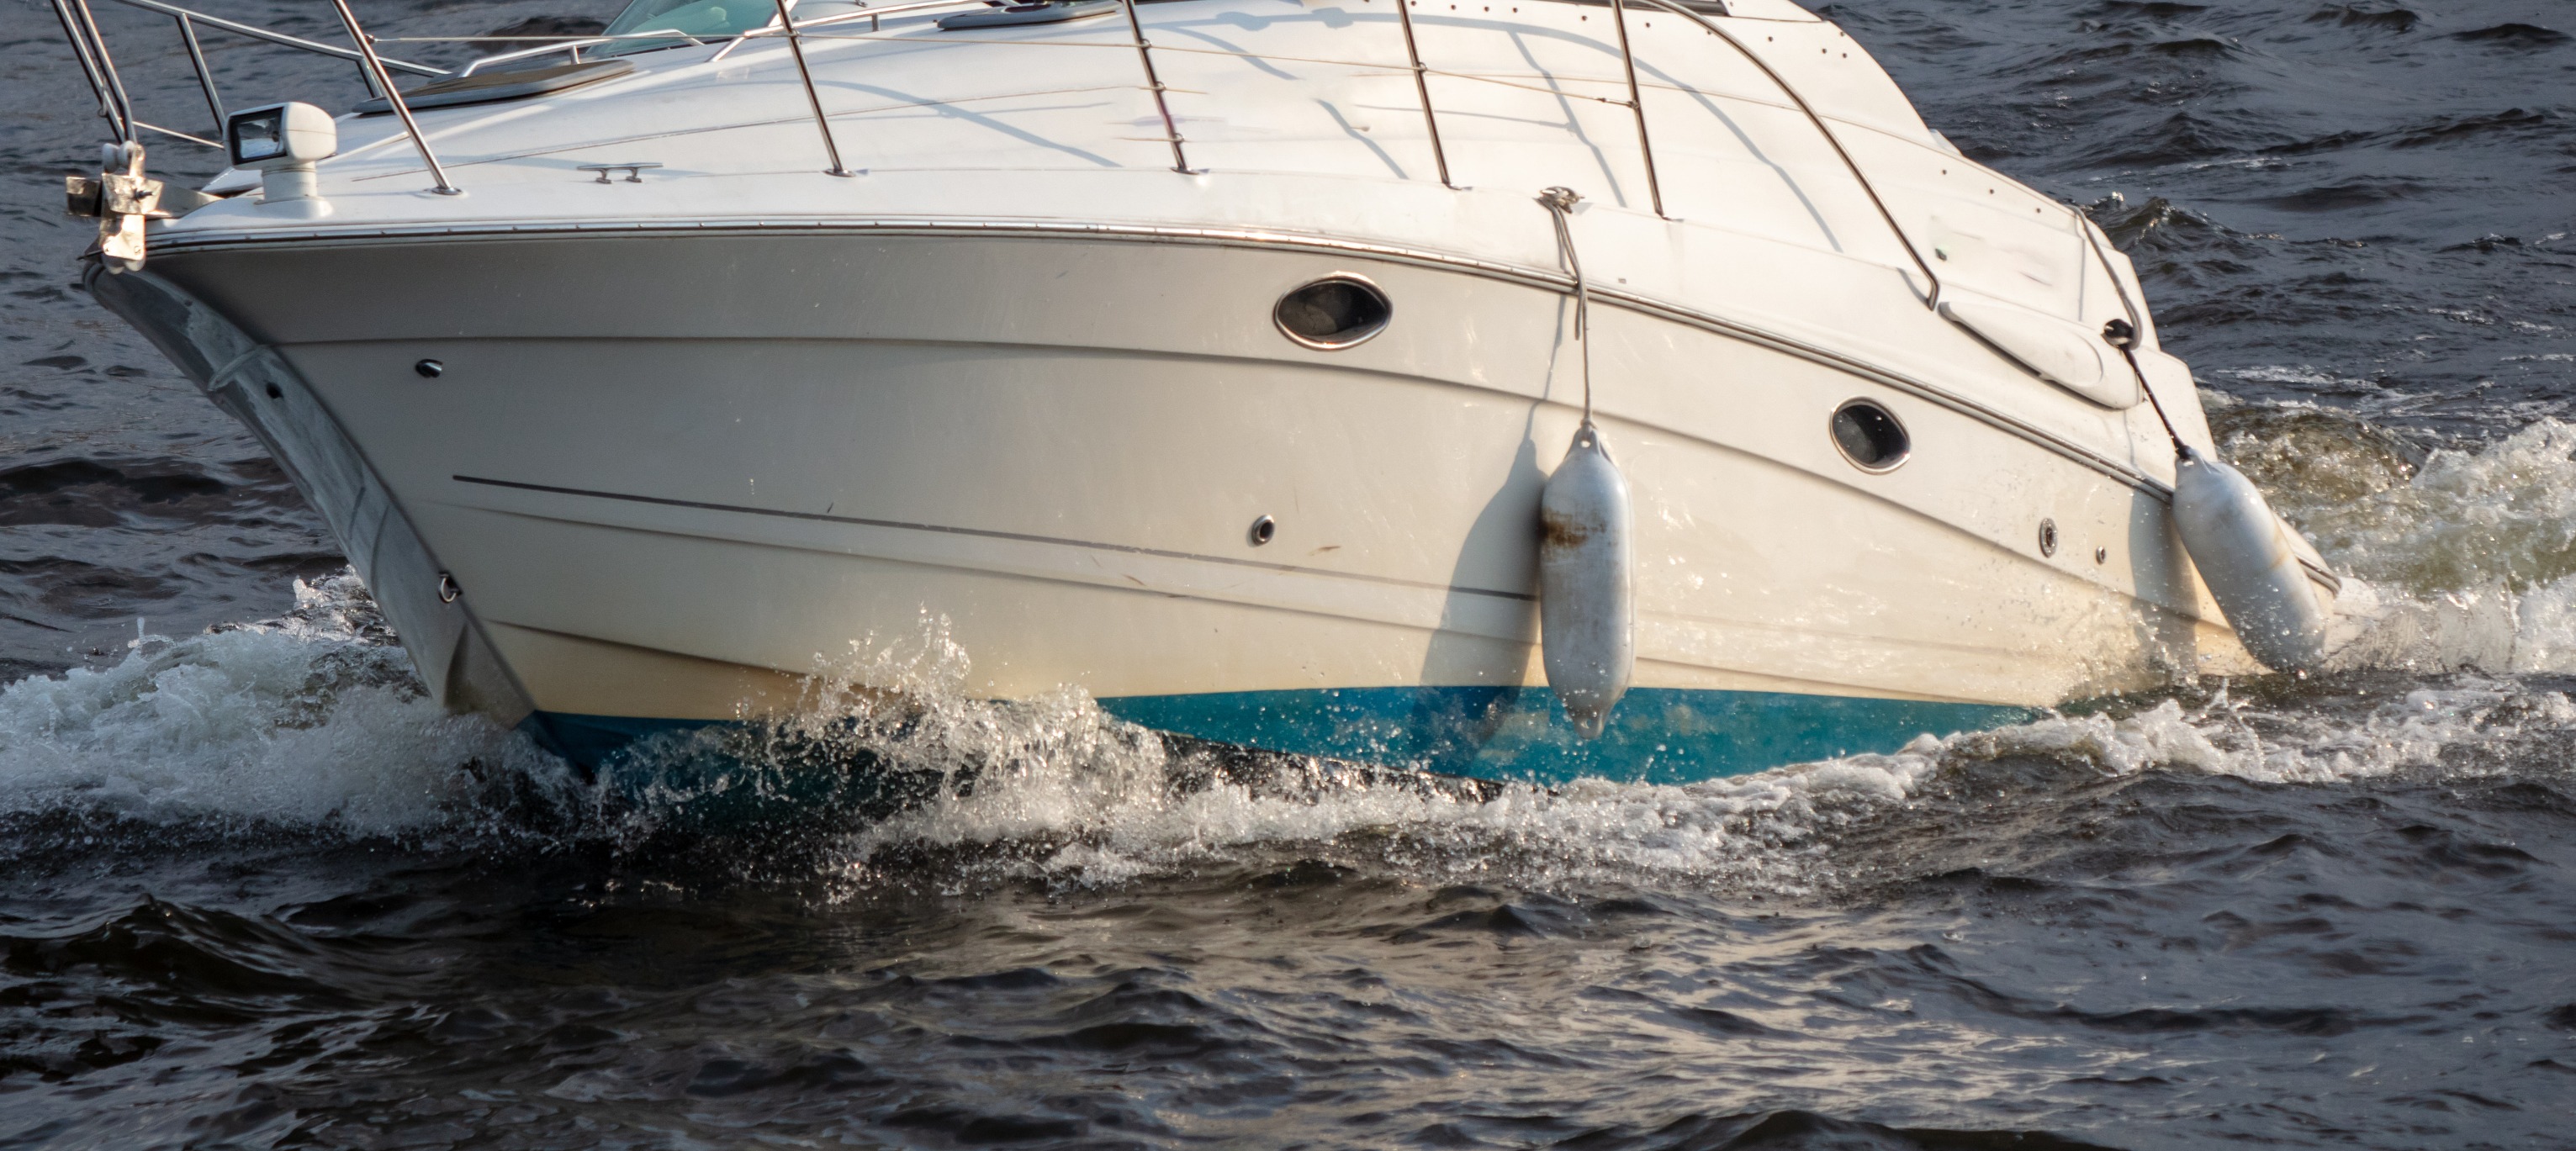 Liability in FL Boating Accidents